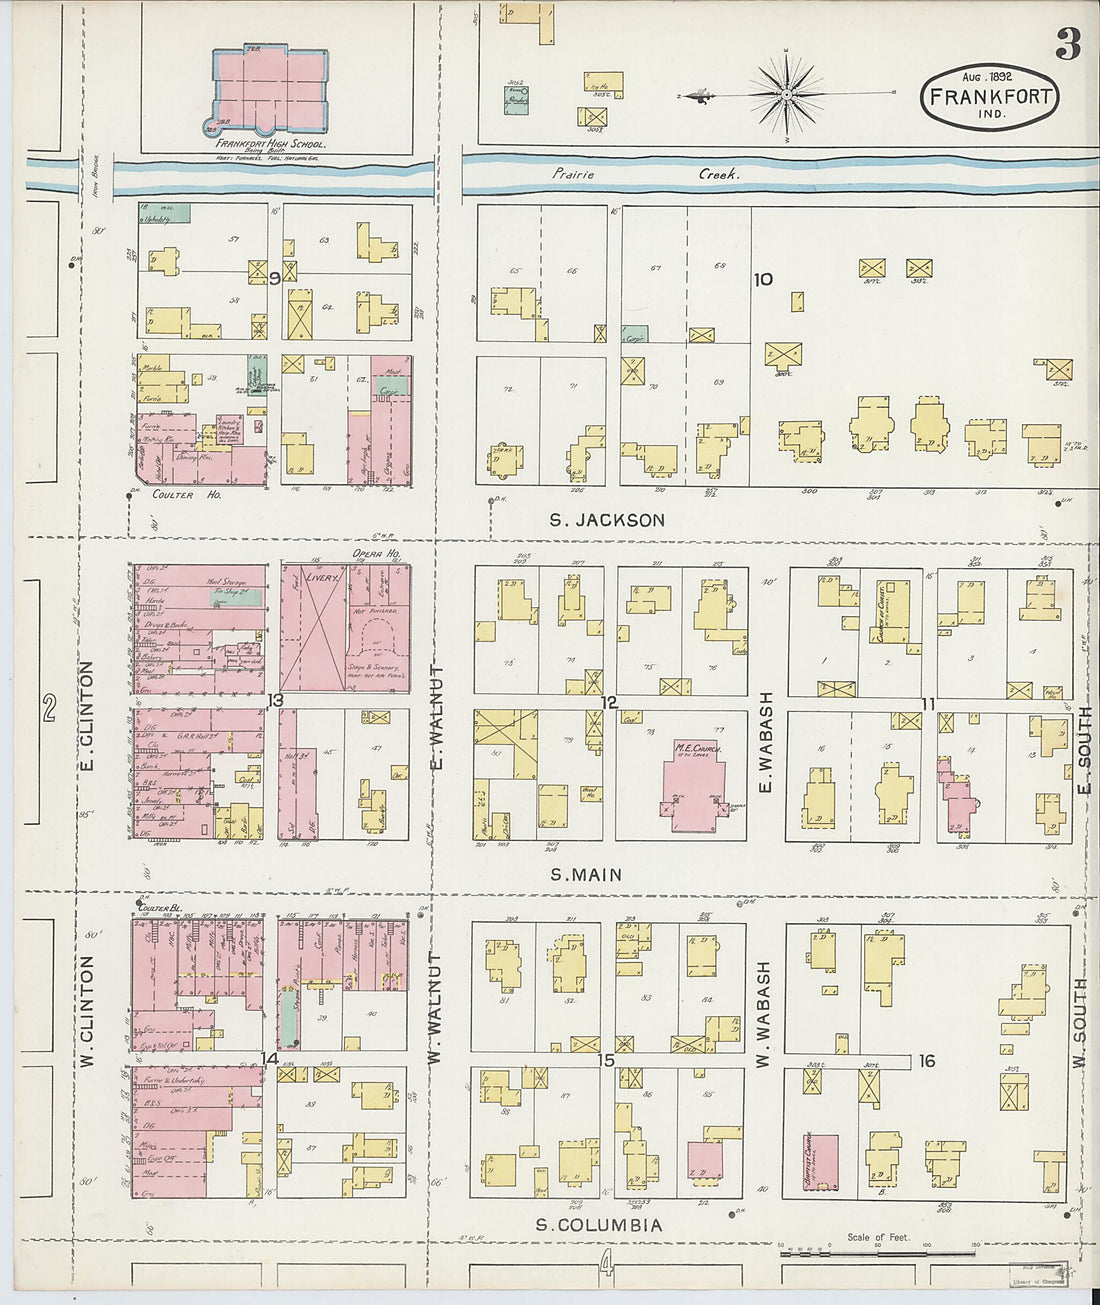 This old map of Frankfort, Clinton County, Indiana was created by Sanborn Map Company in 1892